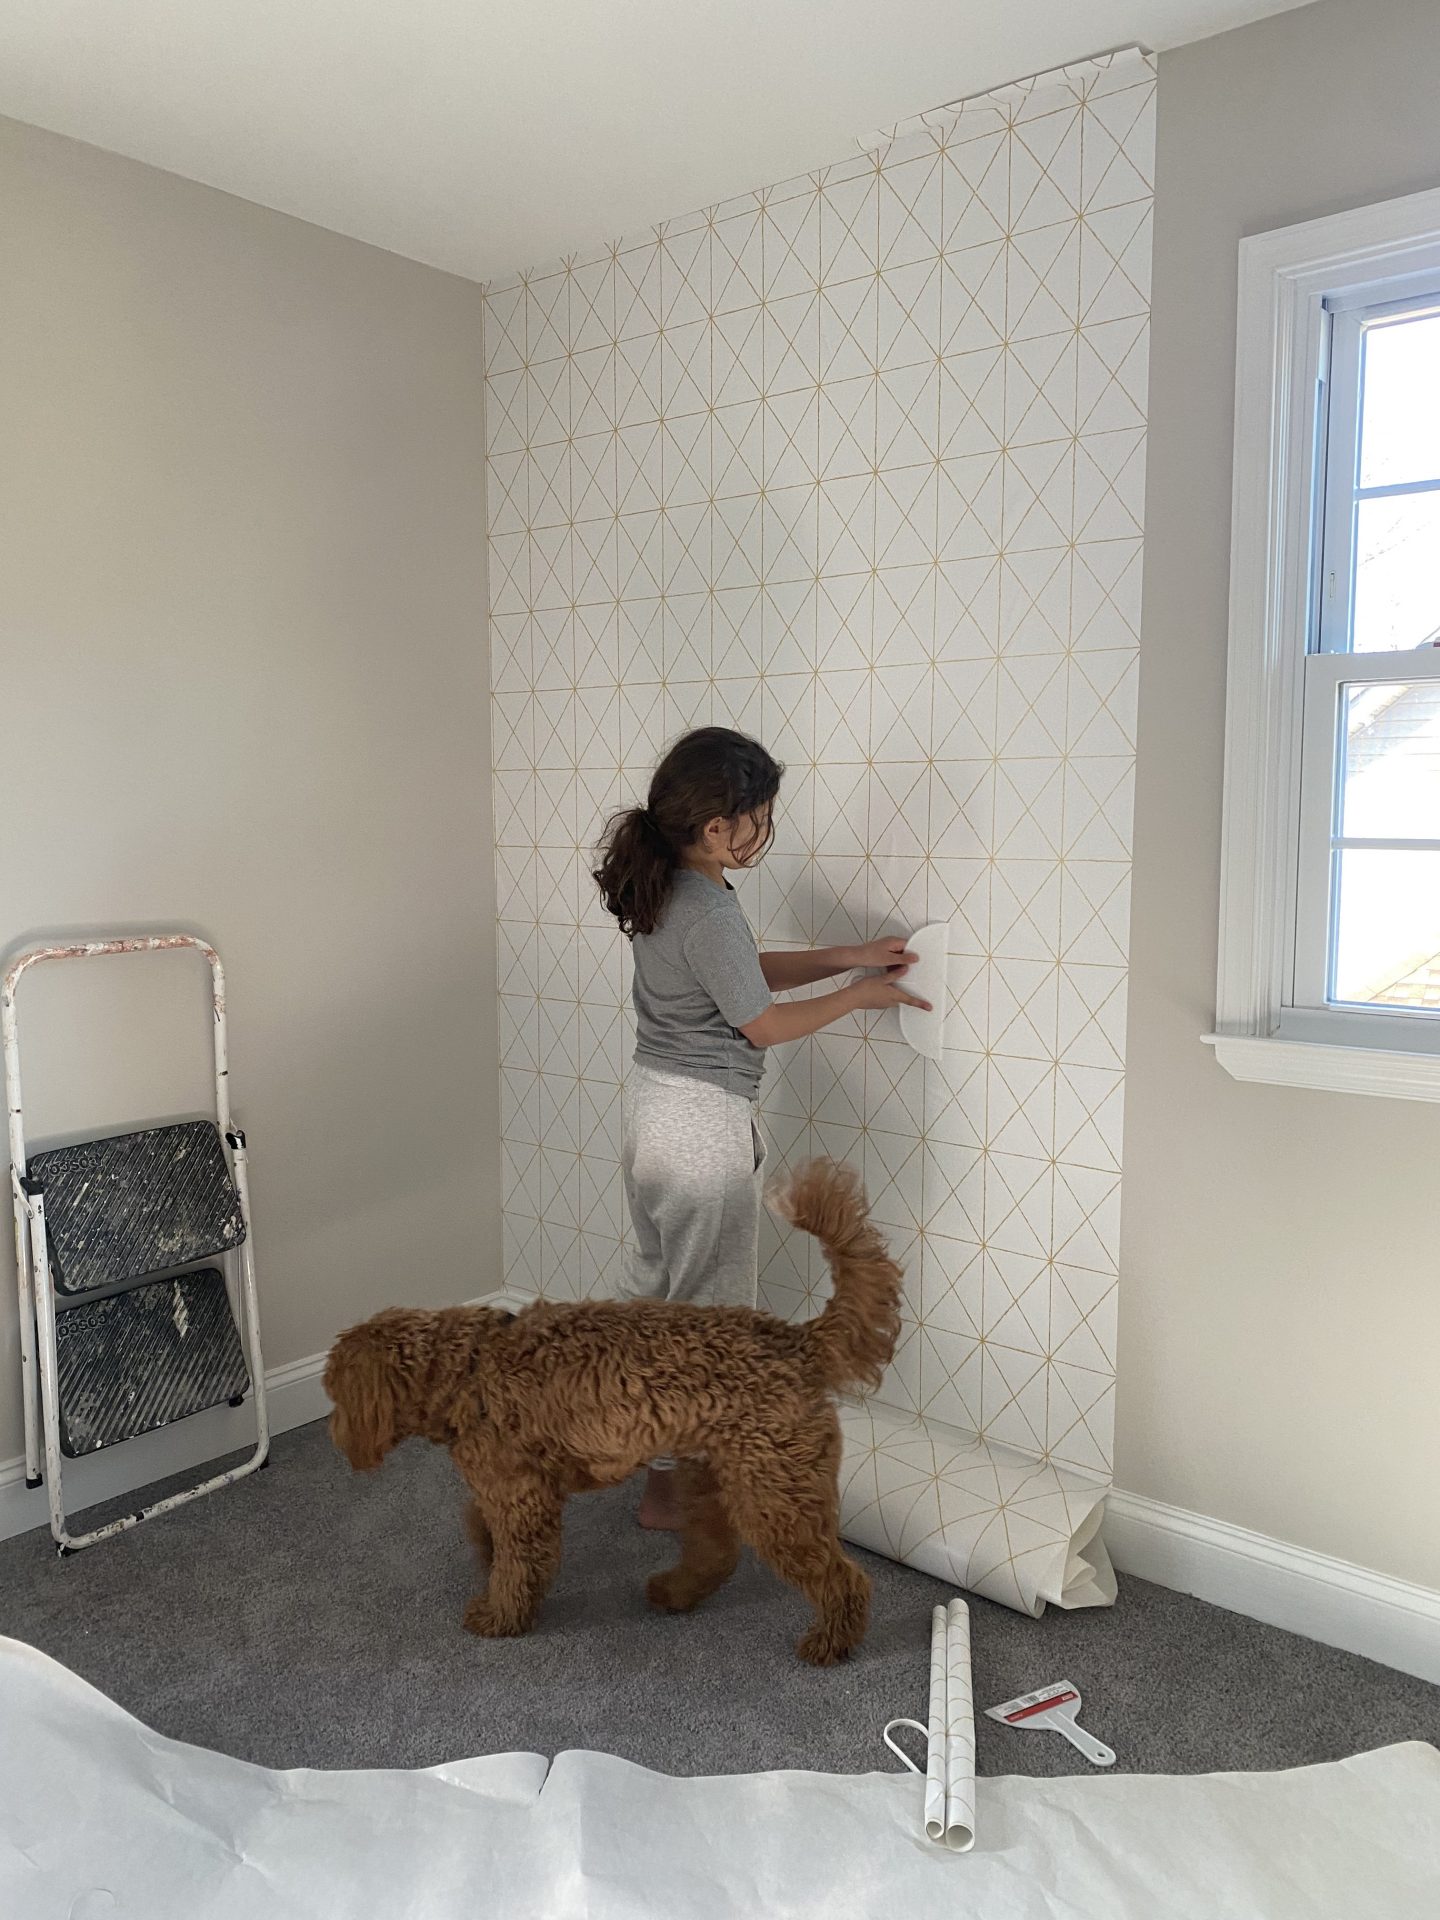 Chocolate and Lace shares tips for peel and stick wallpaper.